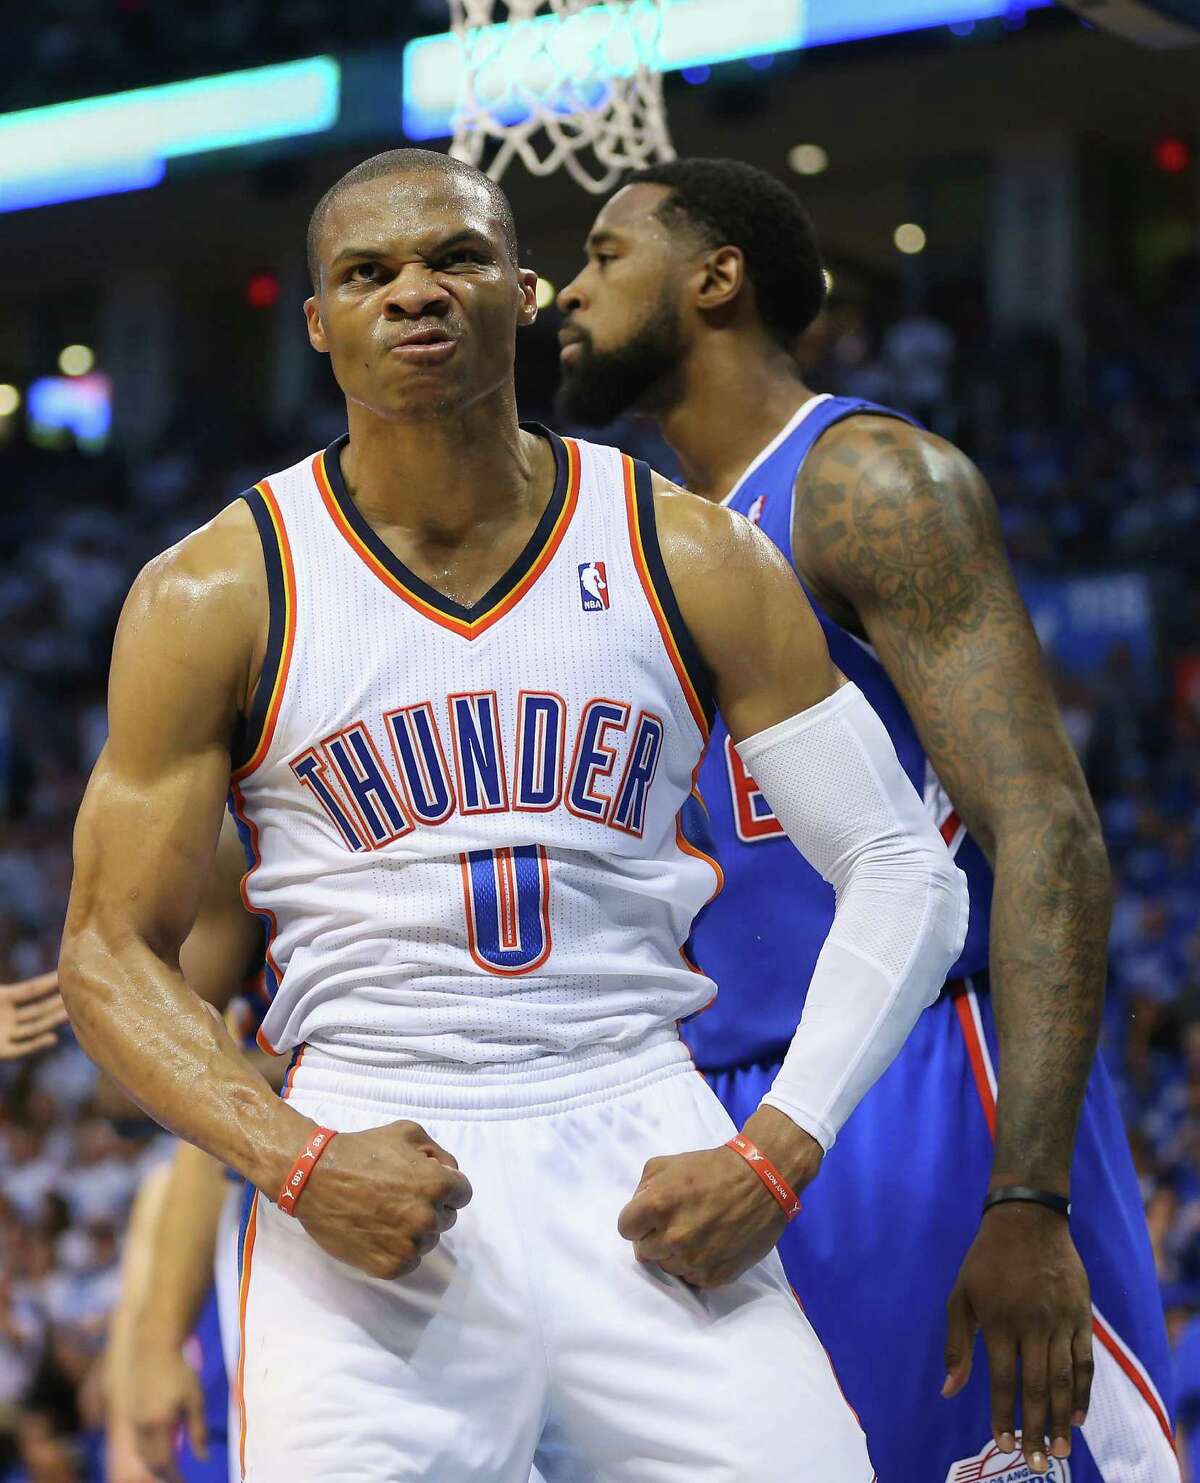 Russell Westbrook overpowered the Clippers on Wednesday with 31 points, 10 rebounds and 10 assists.